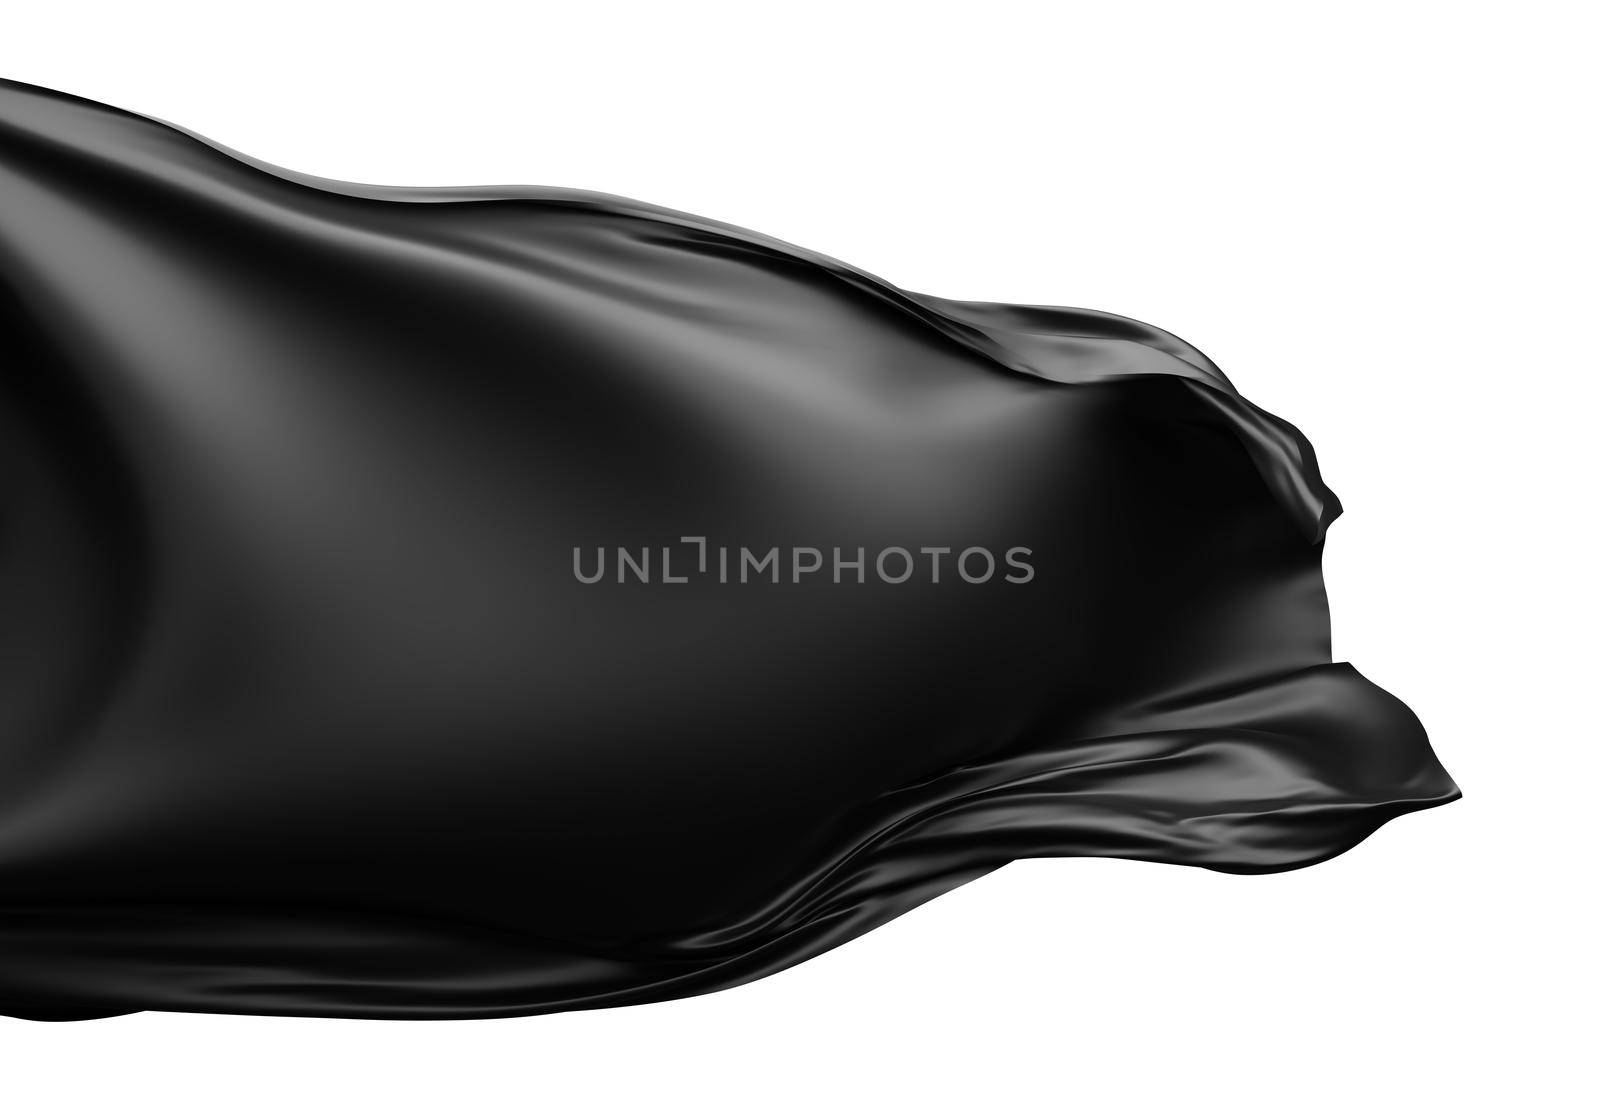 Black fabric flying in the wind isolated on white background 3D render